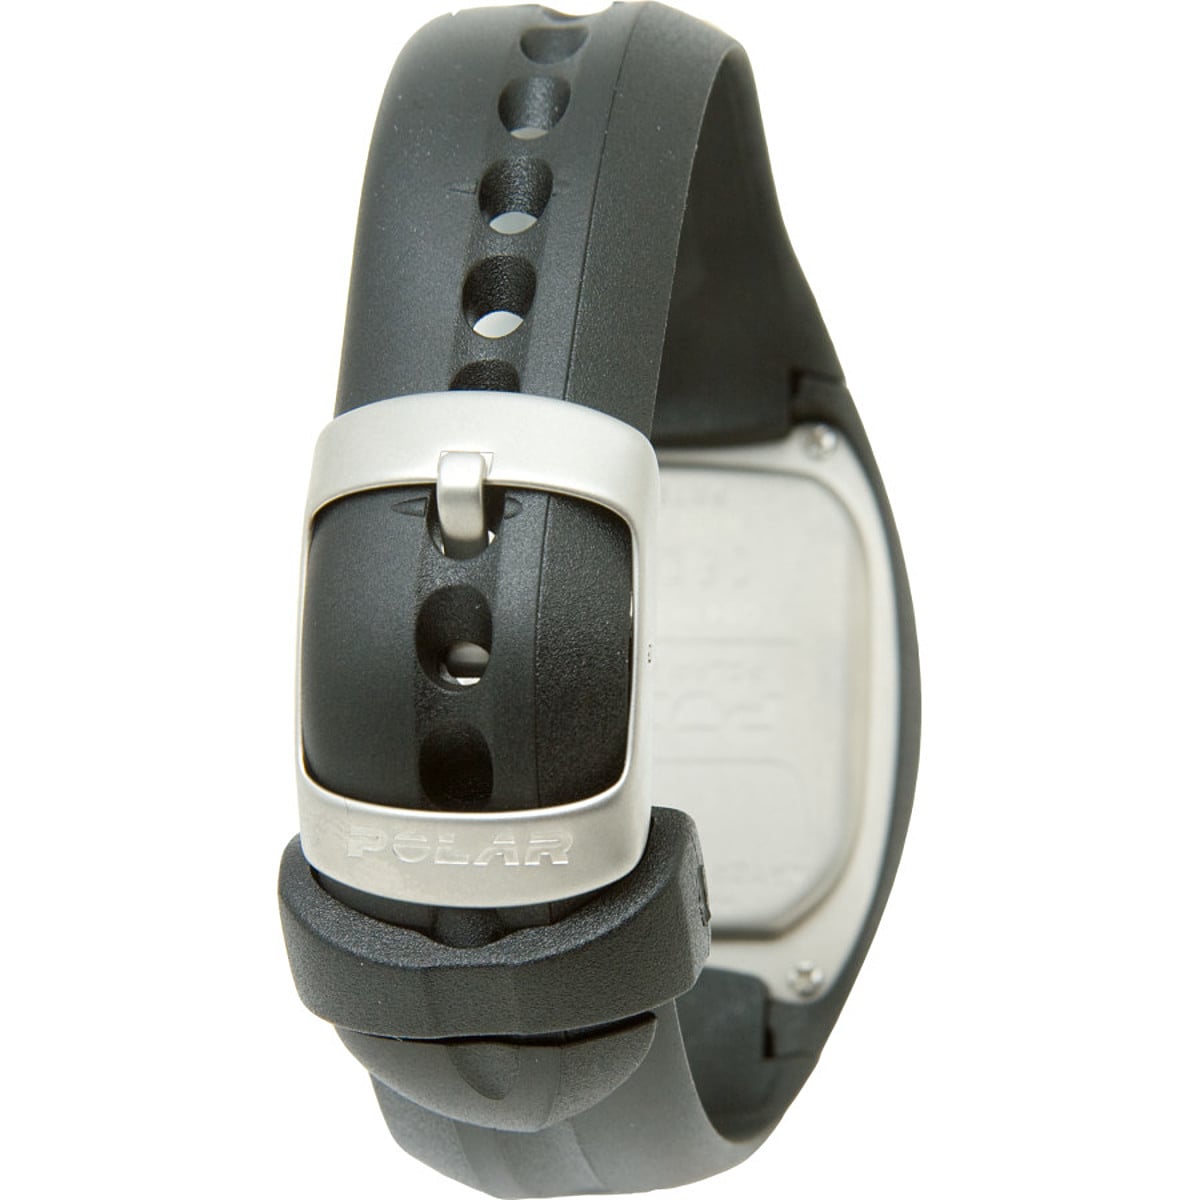 Polar FS2C Heart Rate Monitor Watch - Accessories